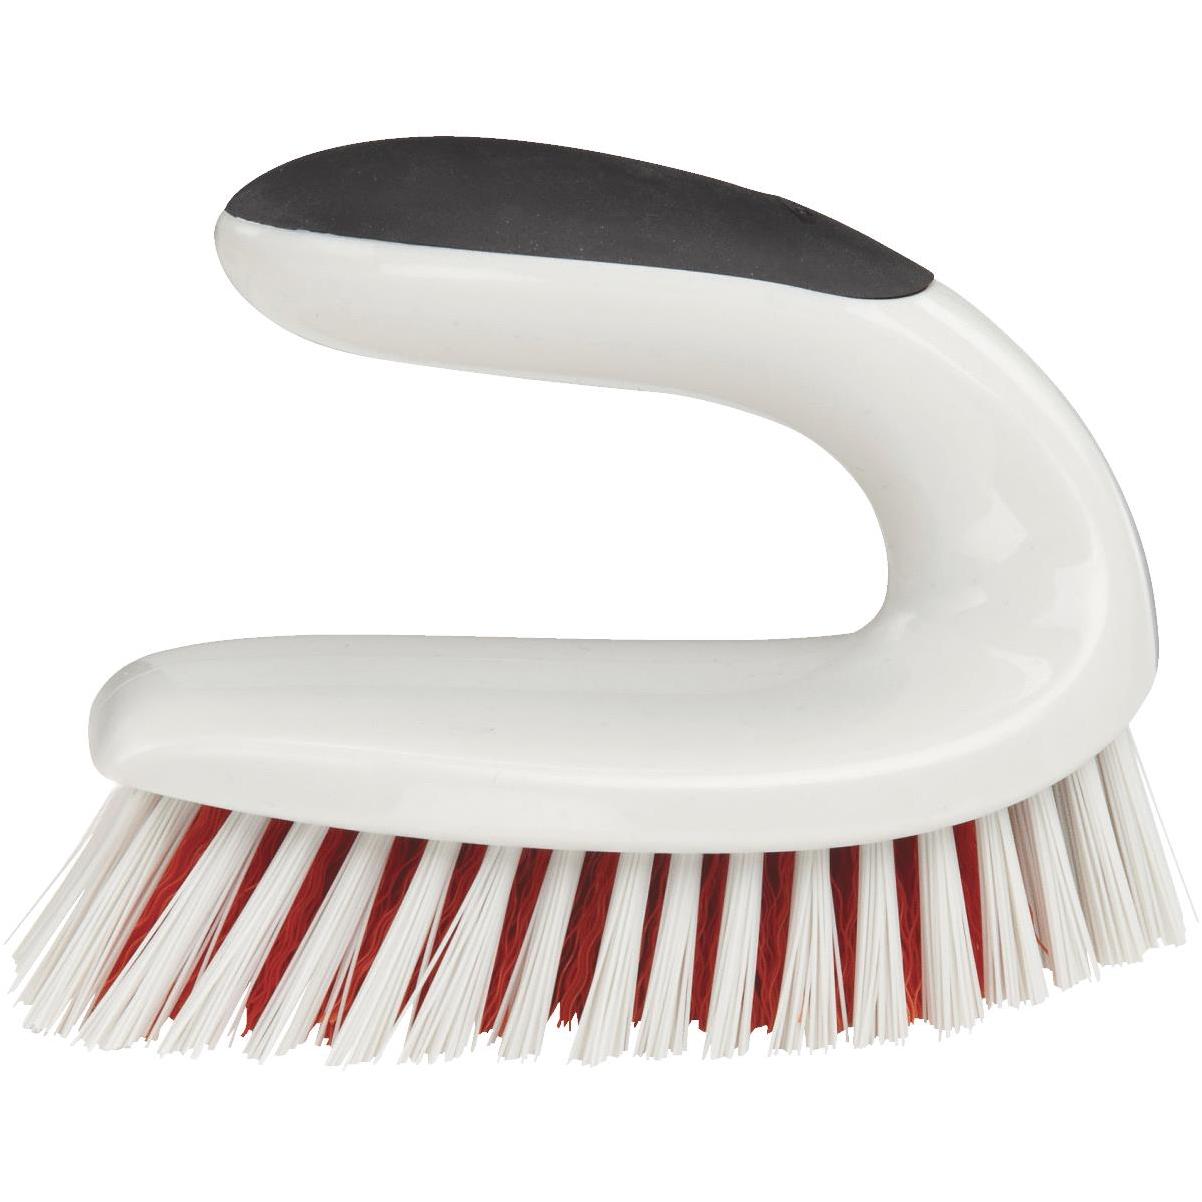 OXO 37481 Polypro Tile and Grout Brush